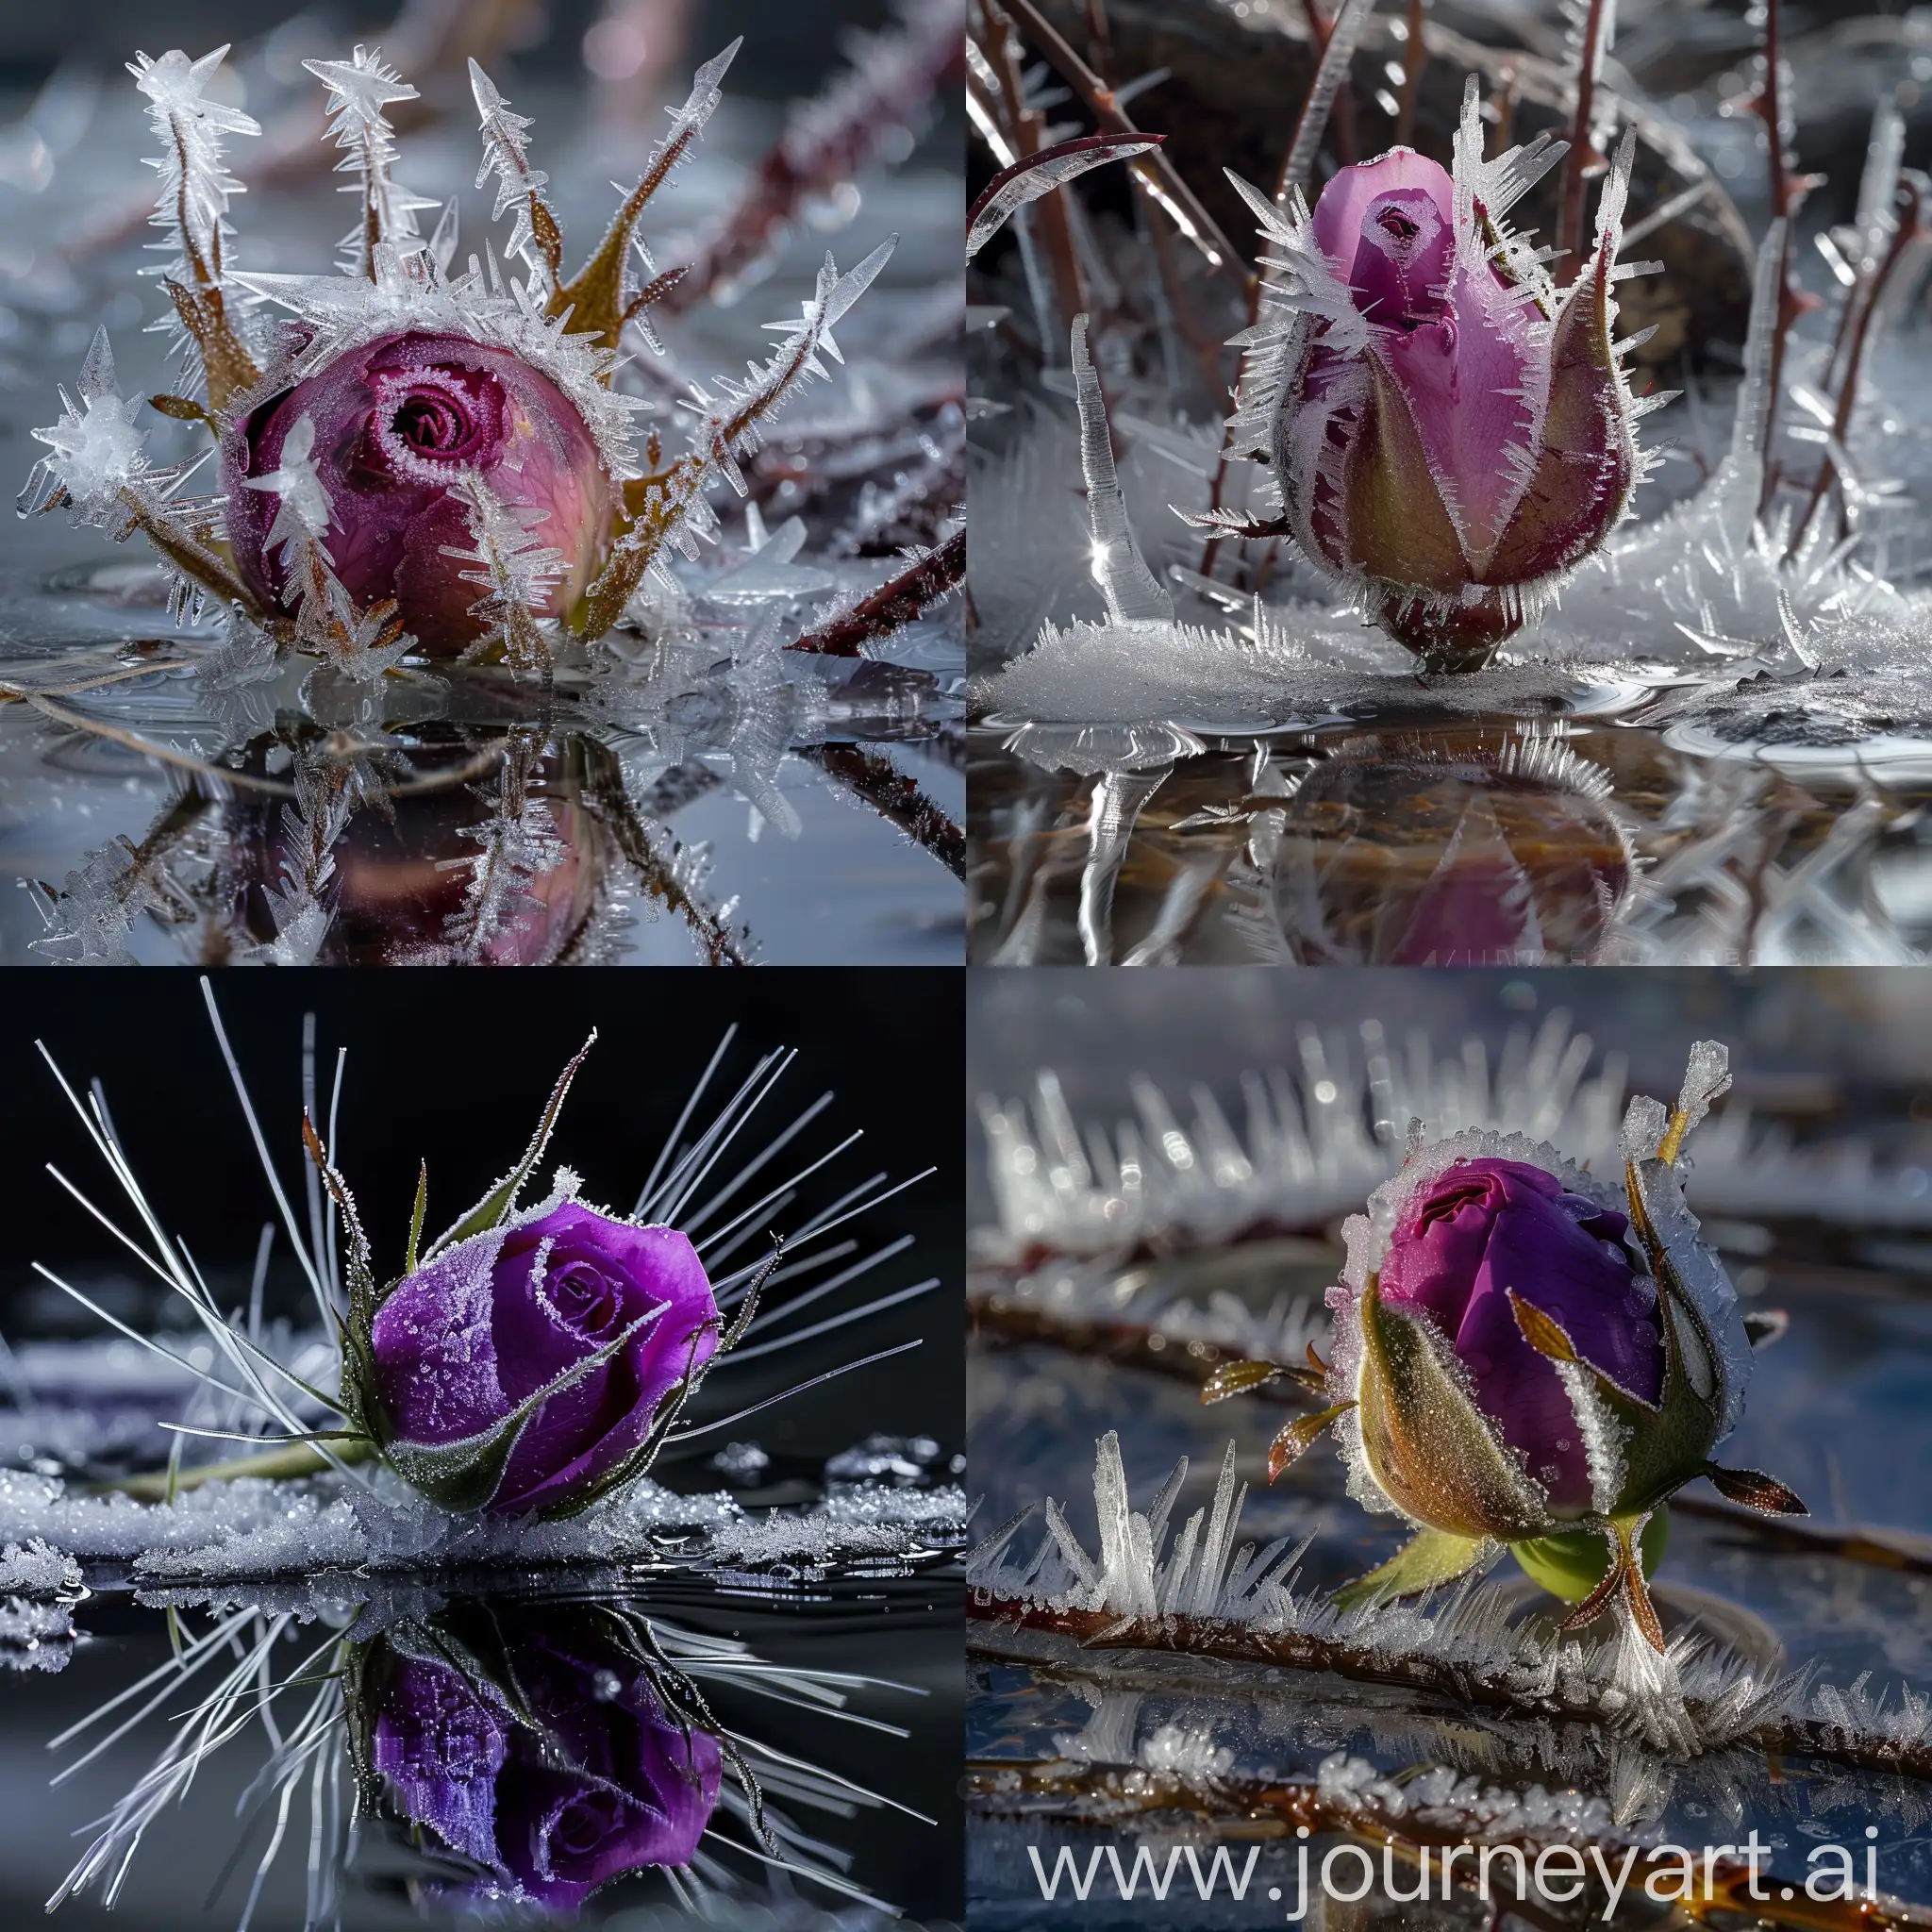 Stunning-Purple-Rose-Bud-with-Icy-Fractal-Crystals-Macro-Photography